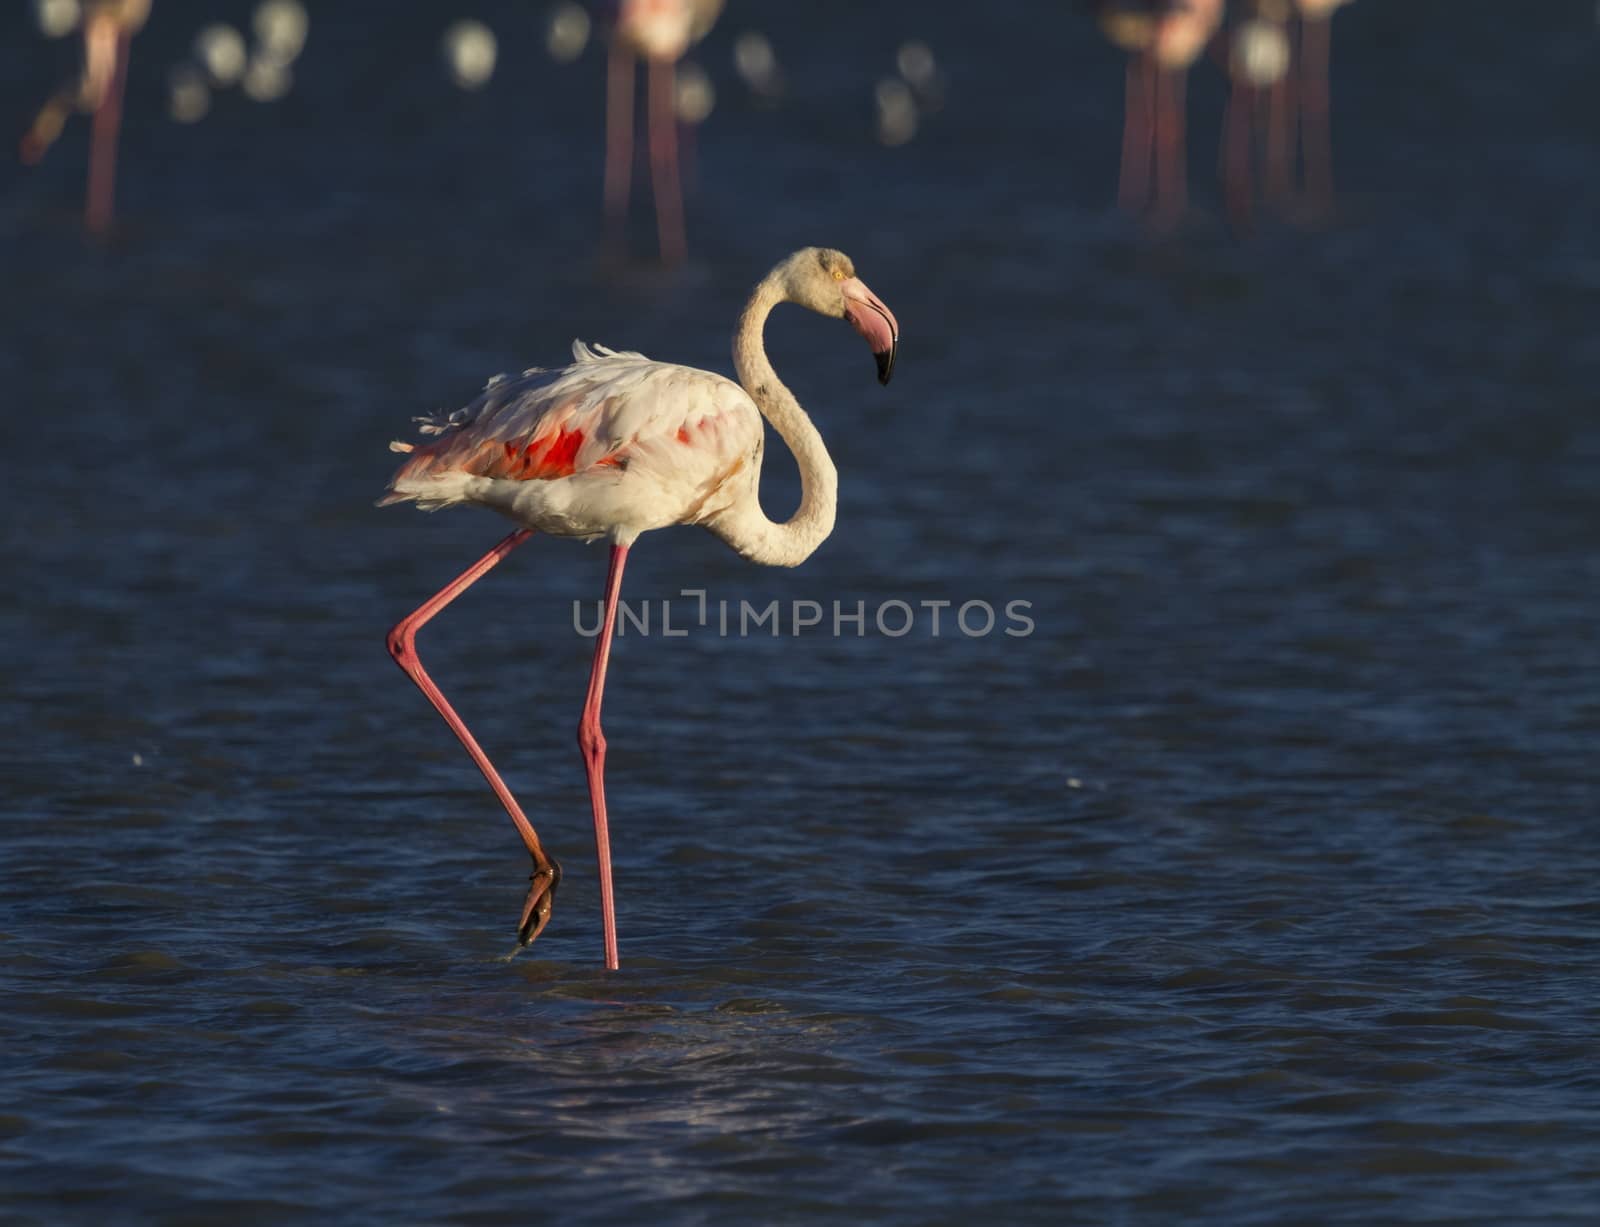 Greater flamingo, phoenicopterus roseus, standing in the blue water, Camargue, France